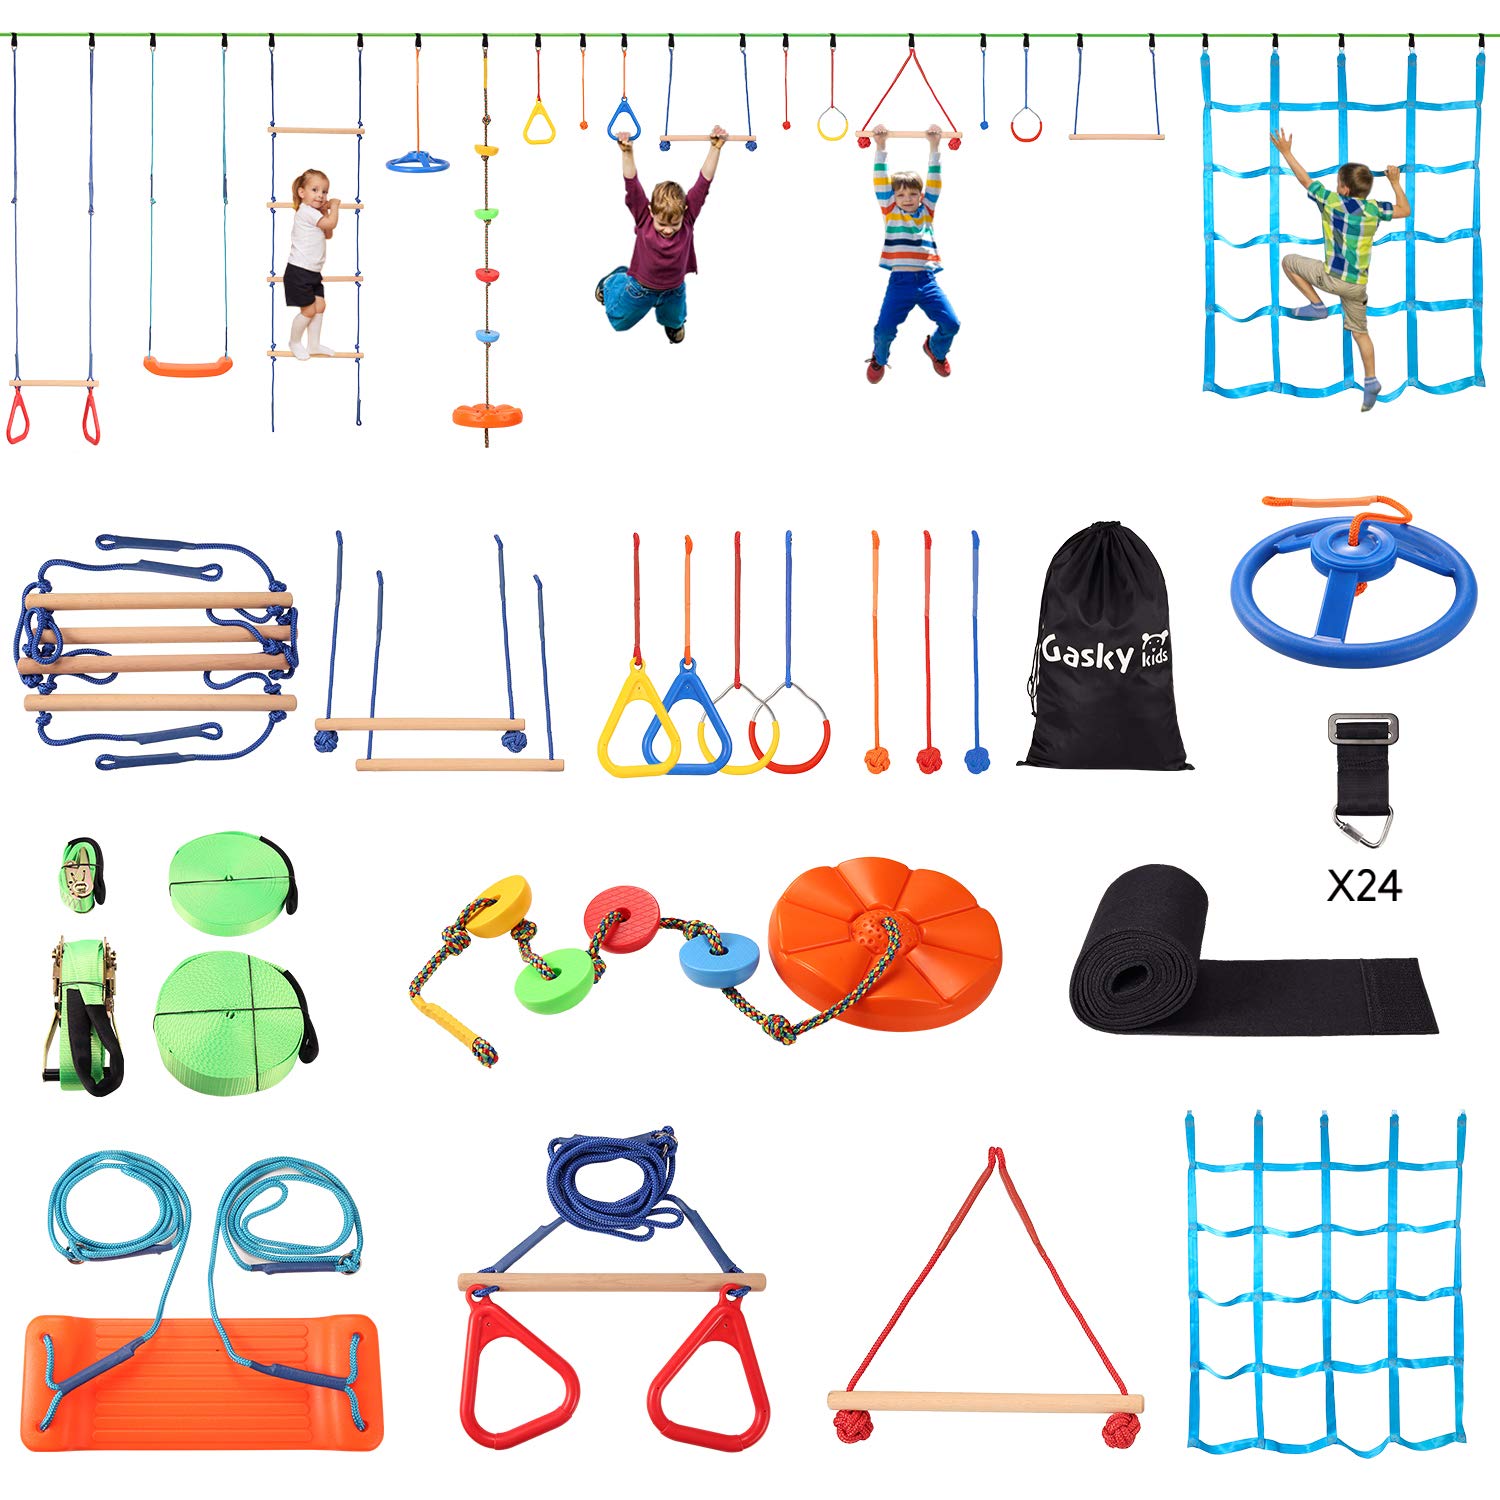 Load image into Gallery viewer, Ninja Warrior 16 Obstacles Course Kit for Kids-55ft Slackline Kit Backyard Outside - Slackline Capacity 1320lbs-with Adjustable Buckles Tree Protectors Carry Bag-Double Line Design
